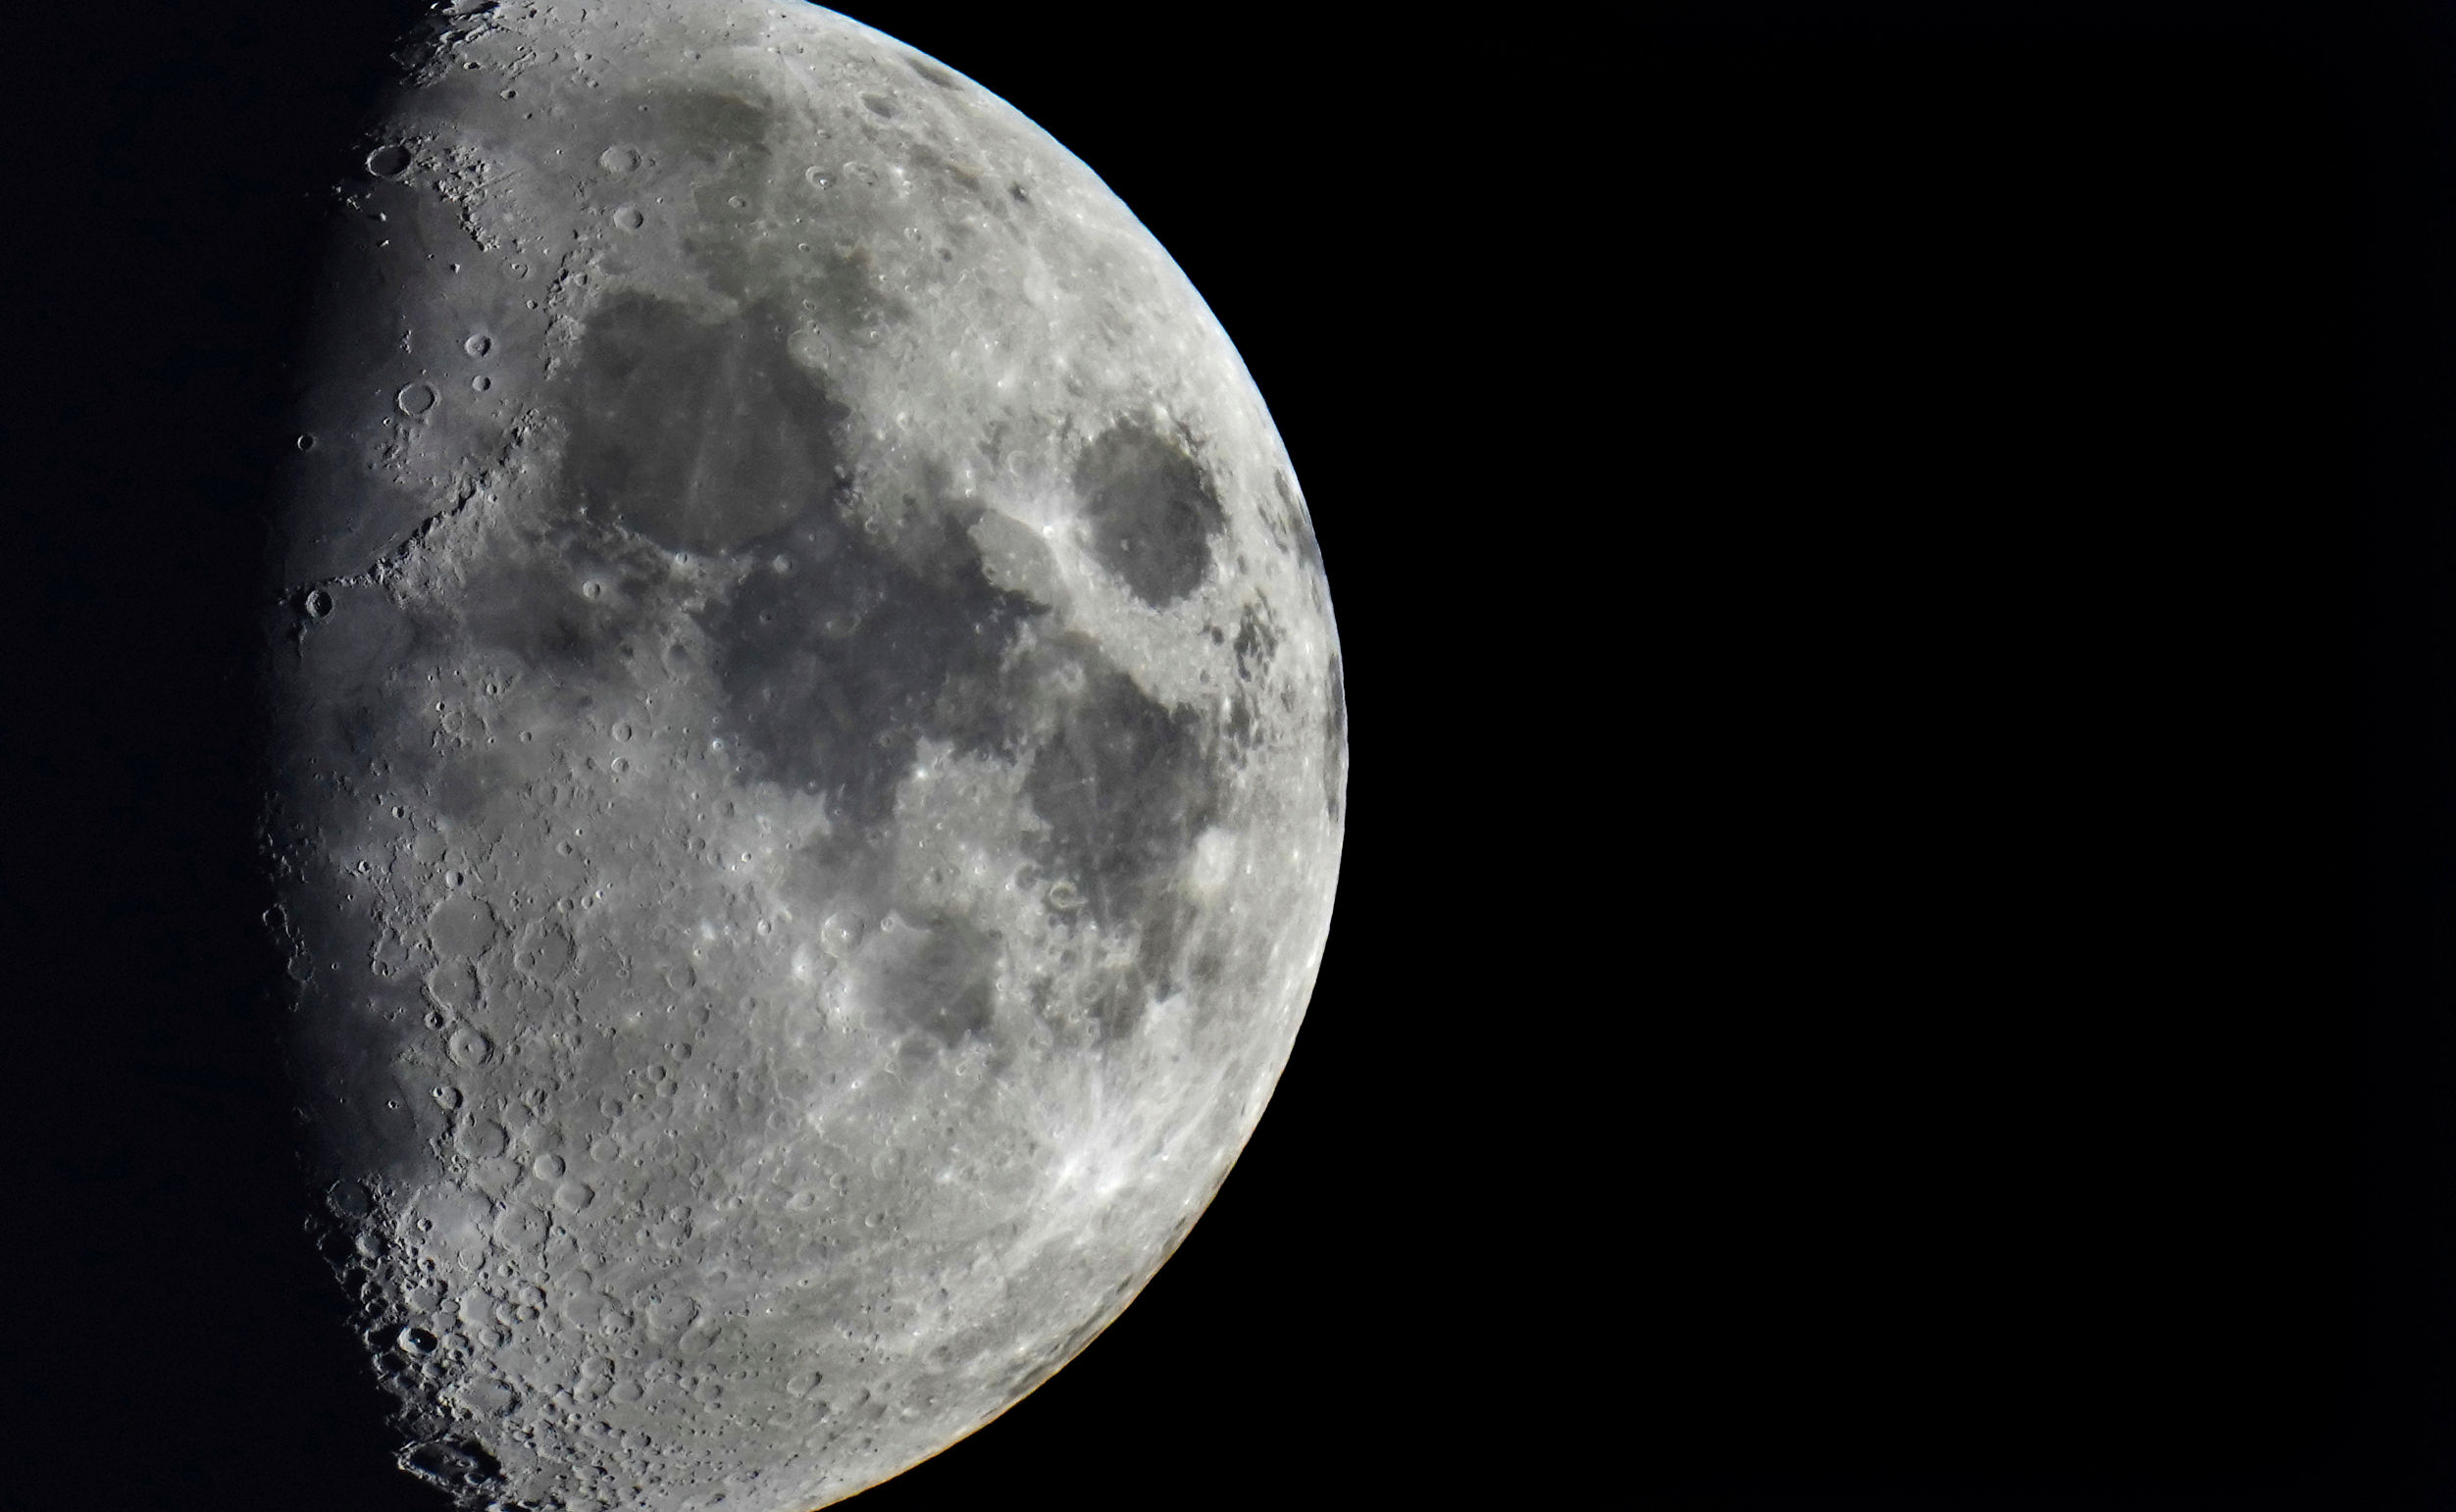 Space debris to crash into moon later this week, may carve out new crater